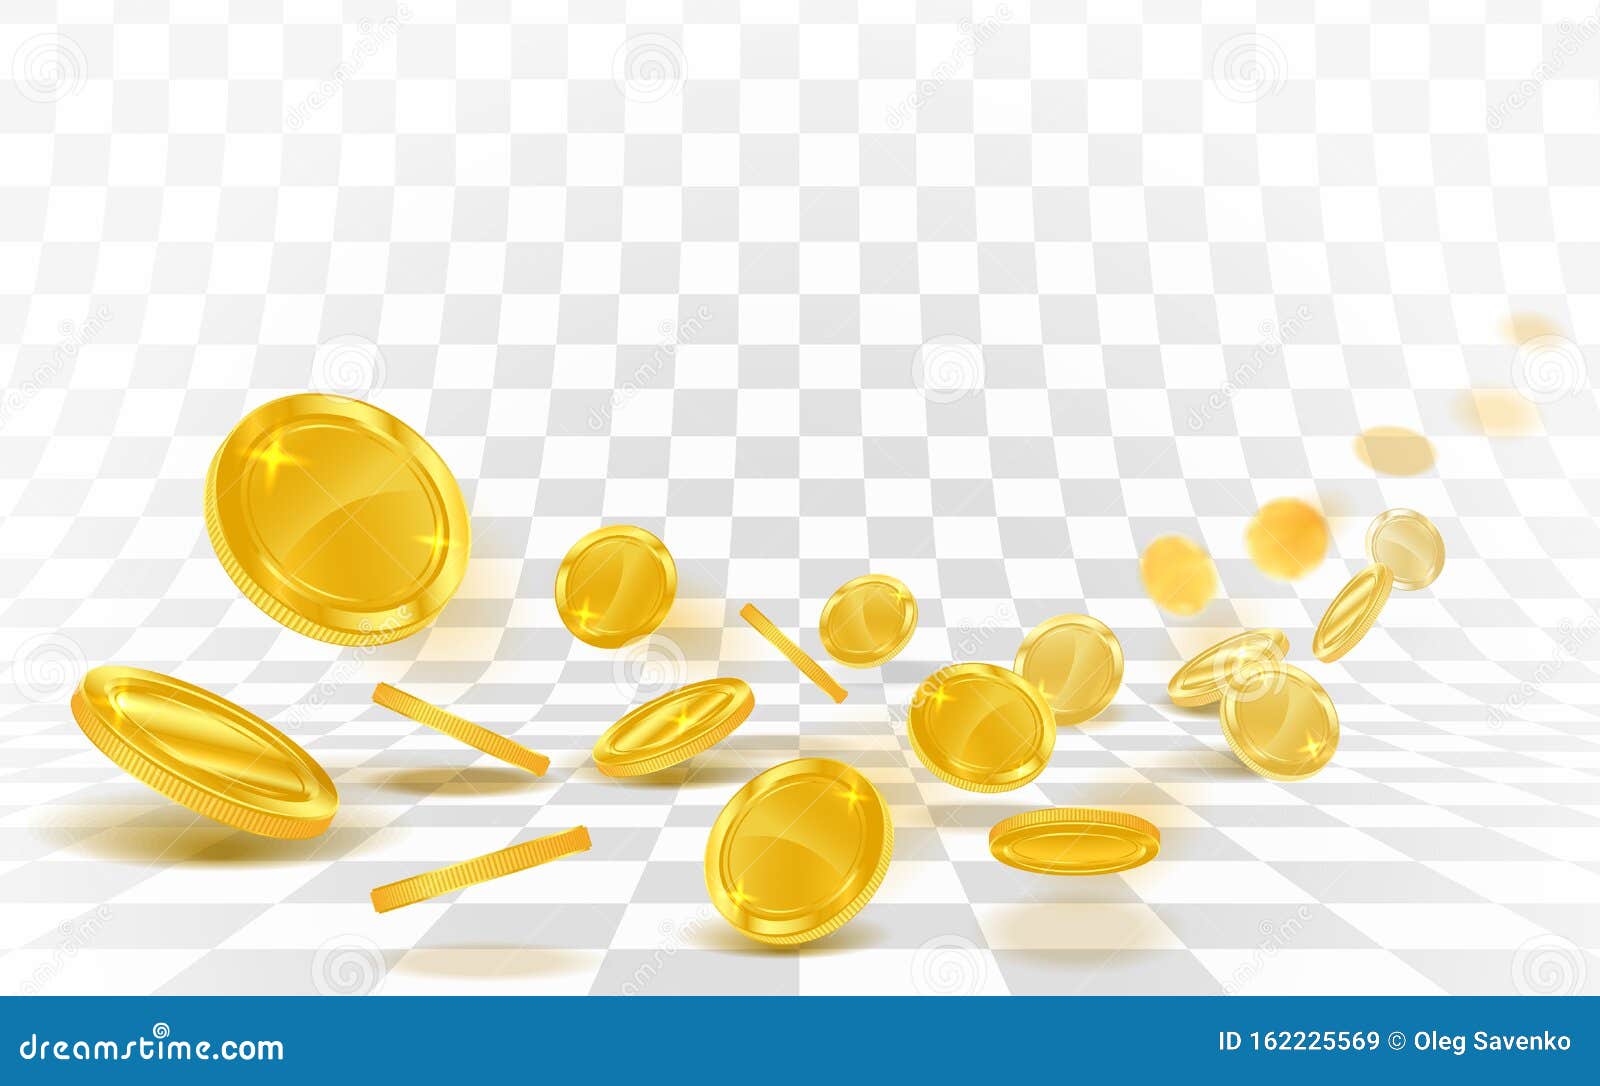 gold coins falling strew on a white background.